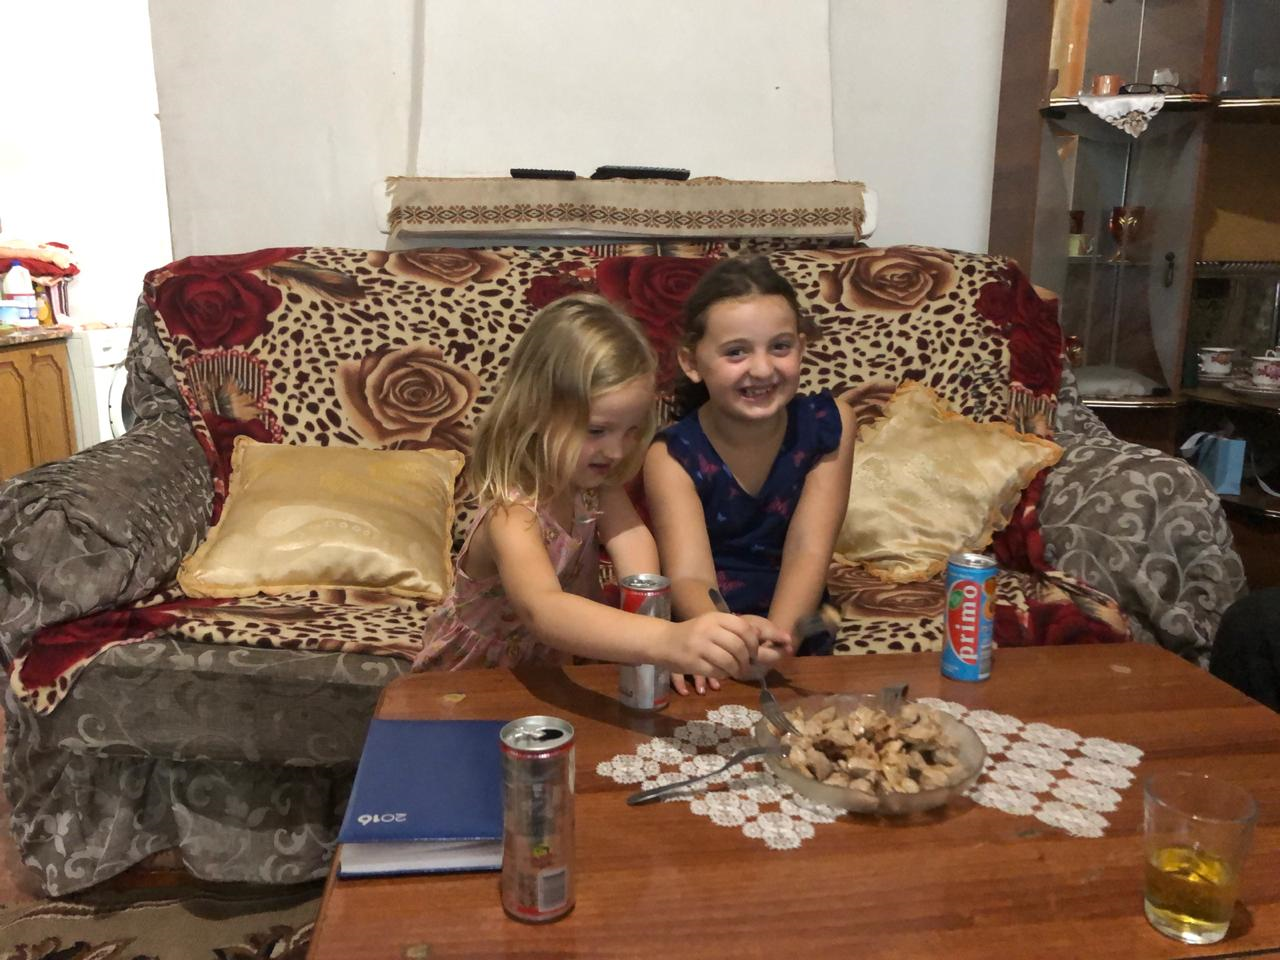 Albanian kids benefit from online qurbani canada. They are on a couch eating food.